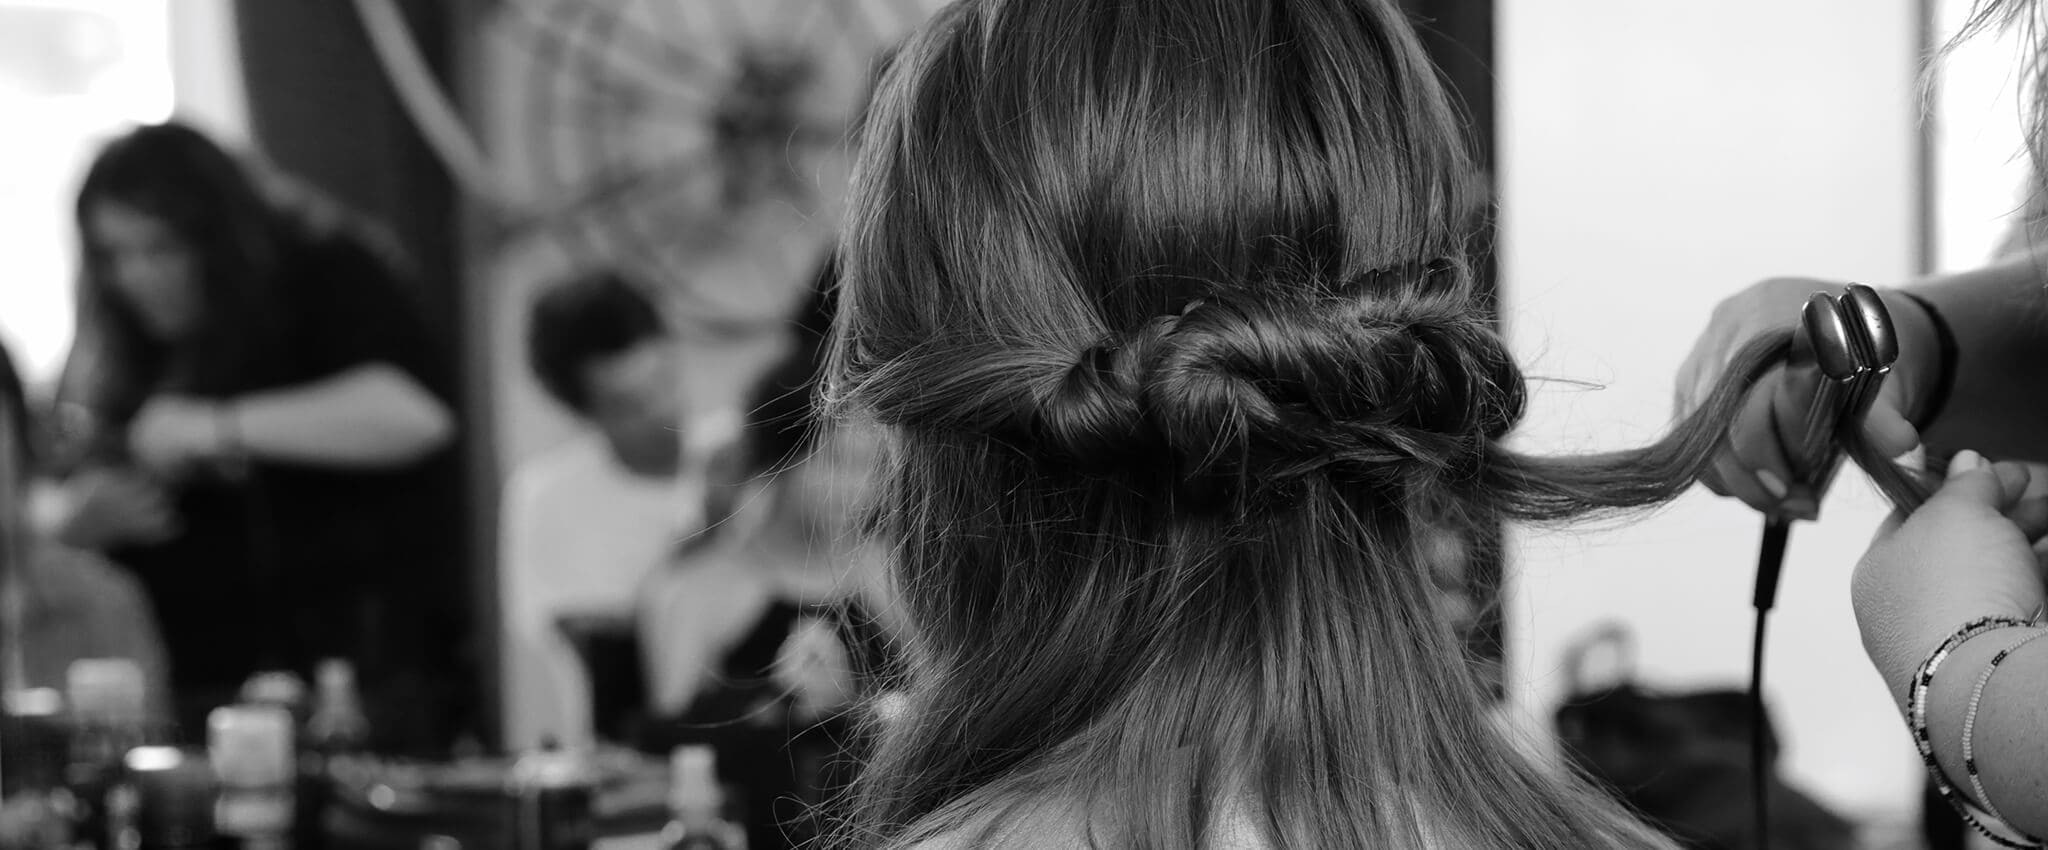 Black and white backstage close up of the back of a model's head, with her long dark hair in a loose braid, with someone straightening a section of her hair with irons  